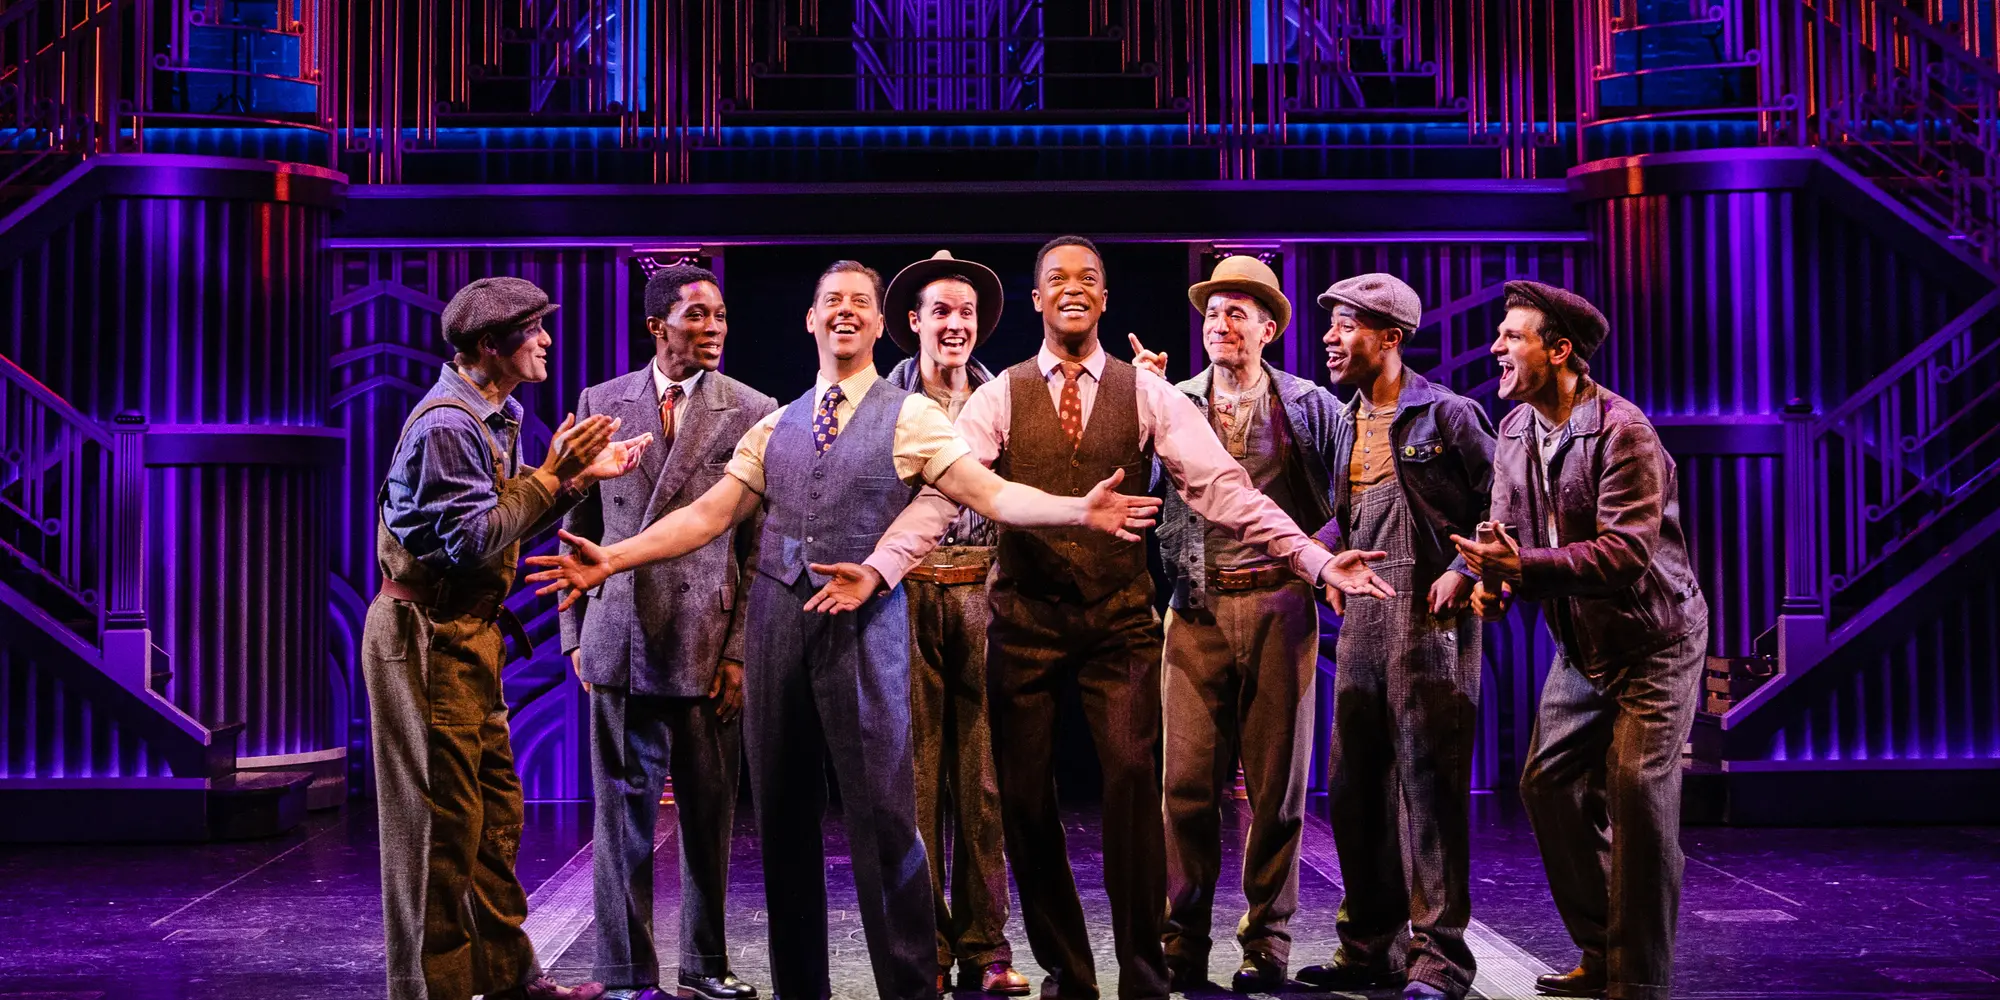 Christian Borle and J. Harrison Ghee with the cast of "Some Like it Hot". Photo credit: Marc J. Franklin